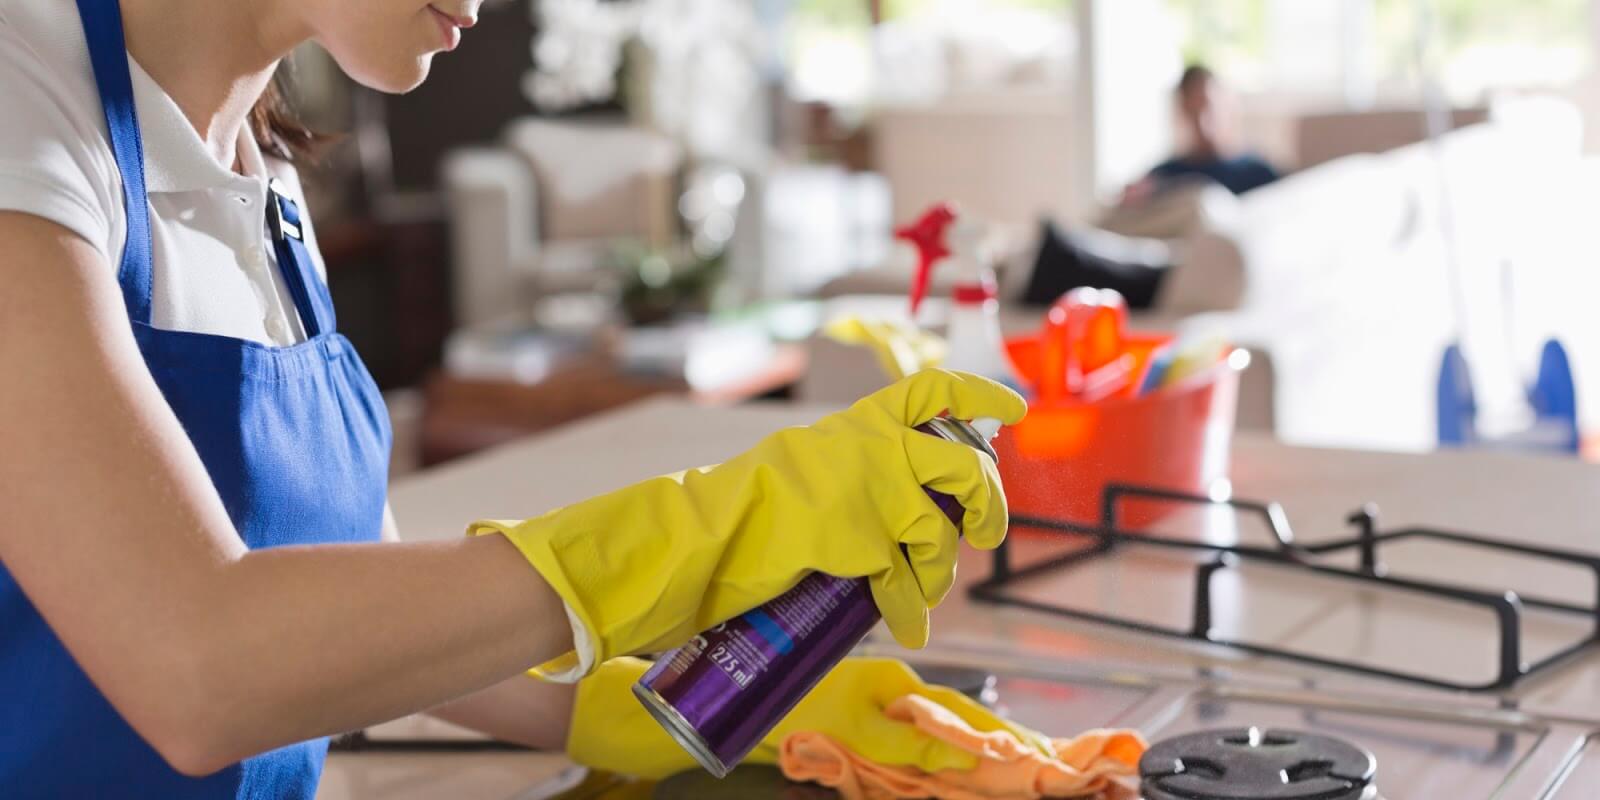 10 Minute House Cleaning Tips